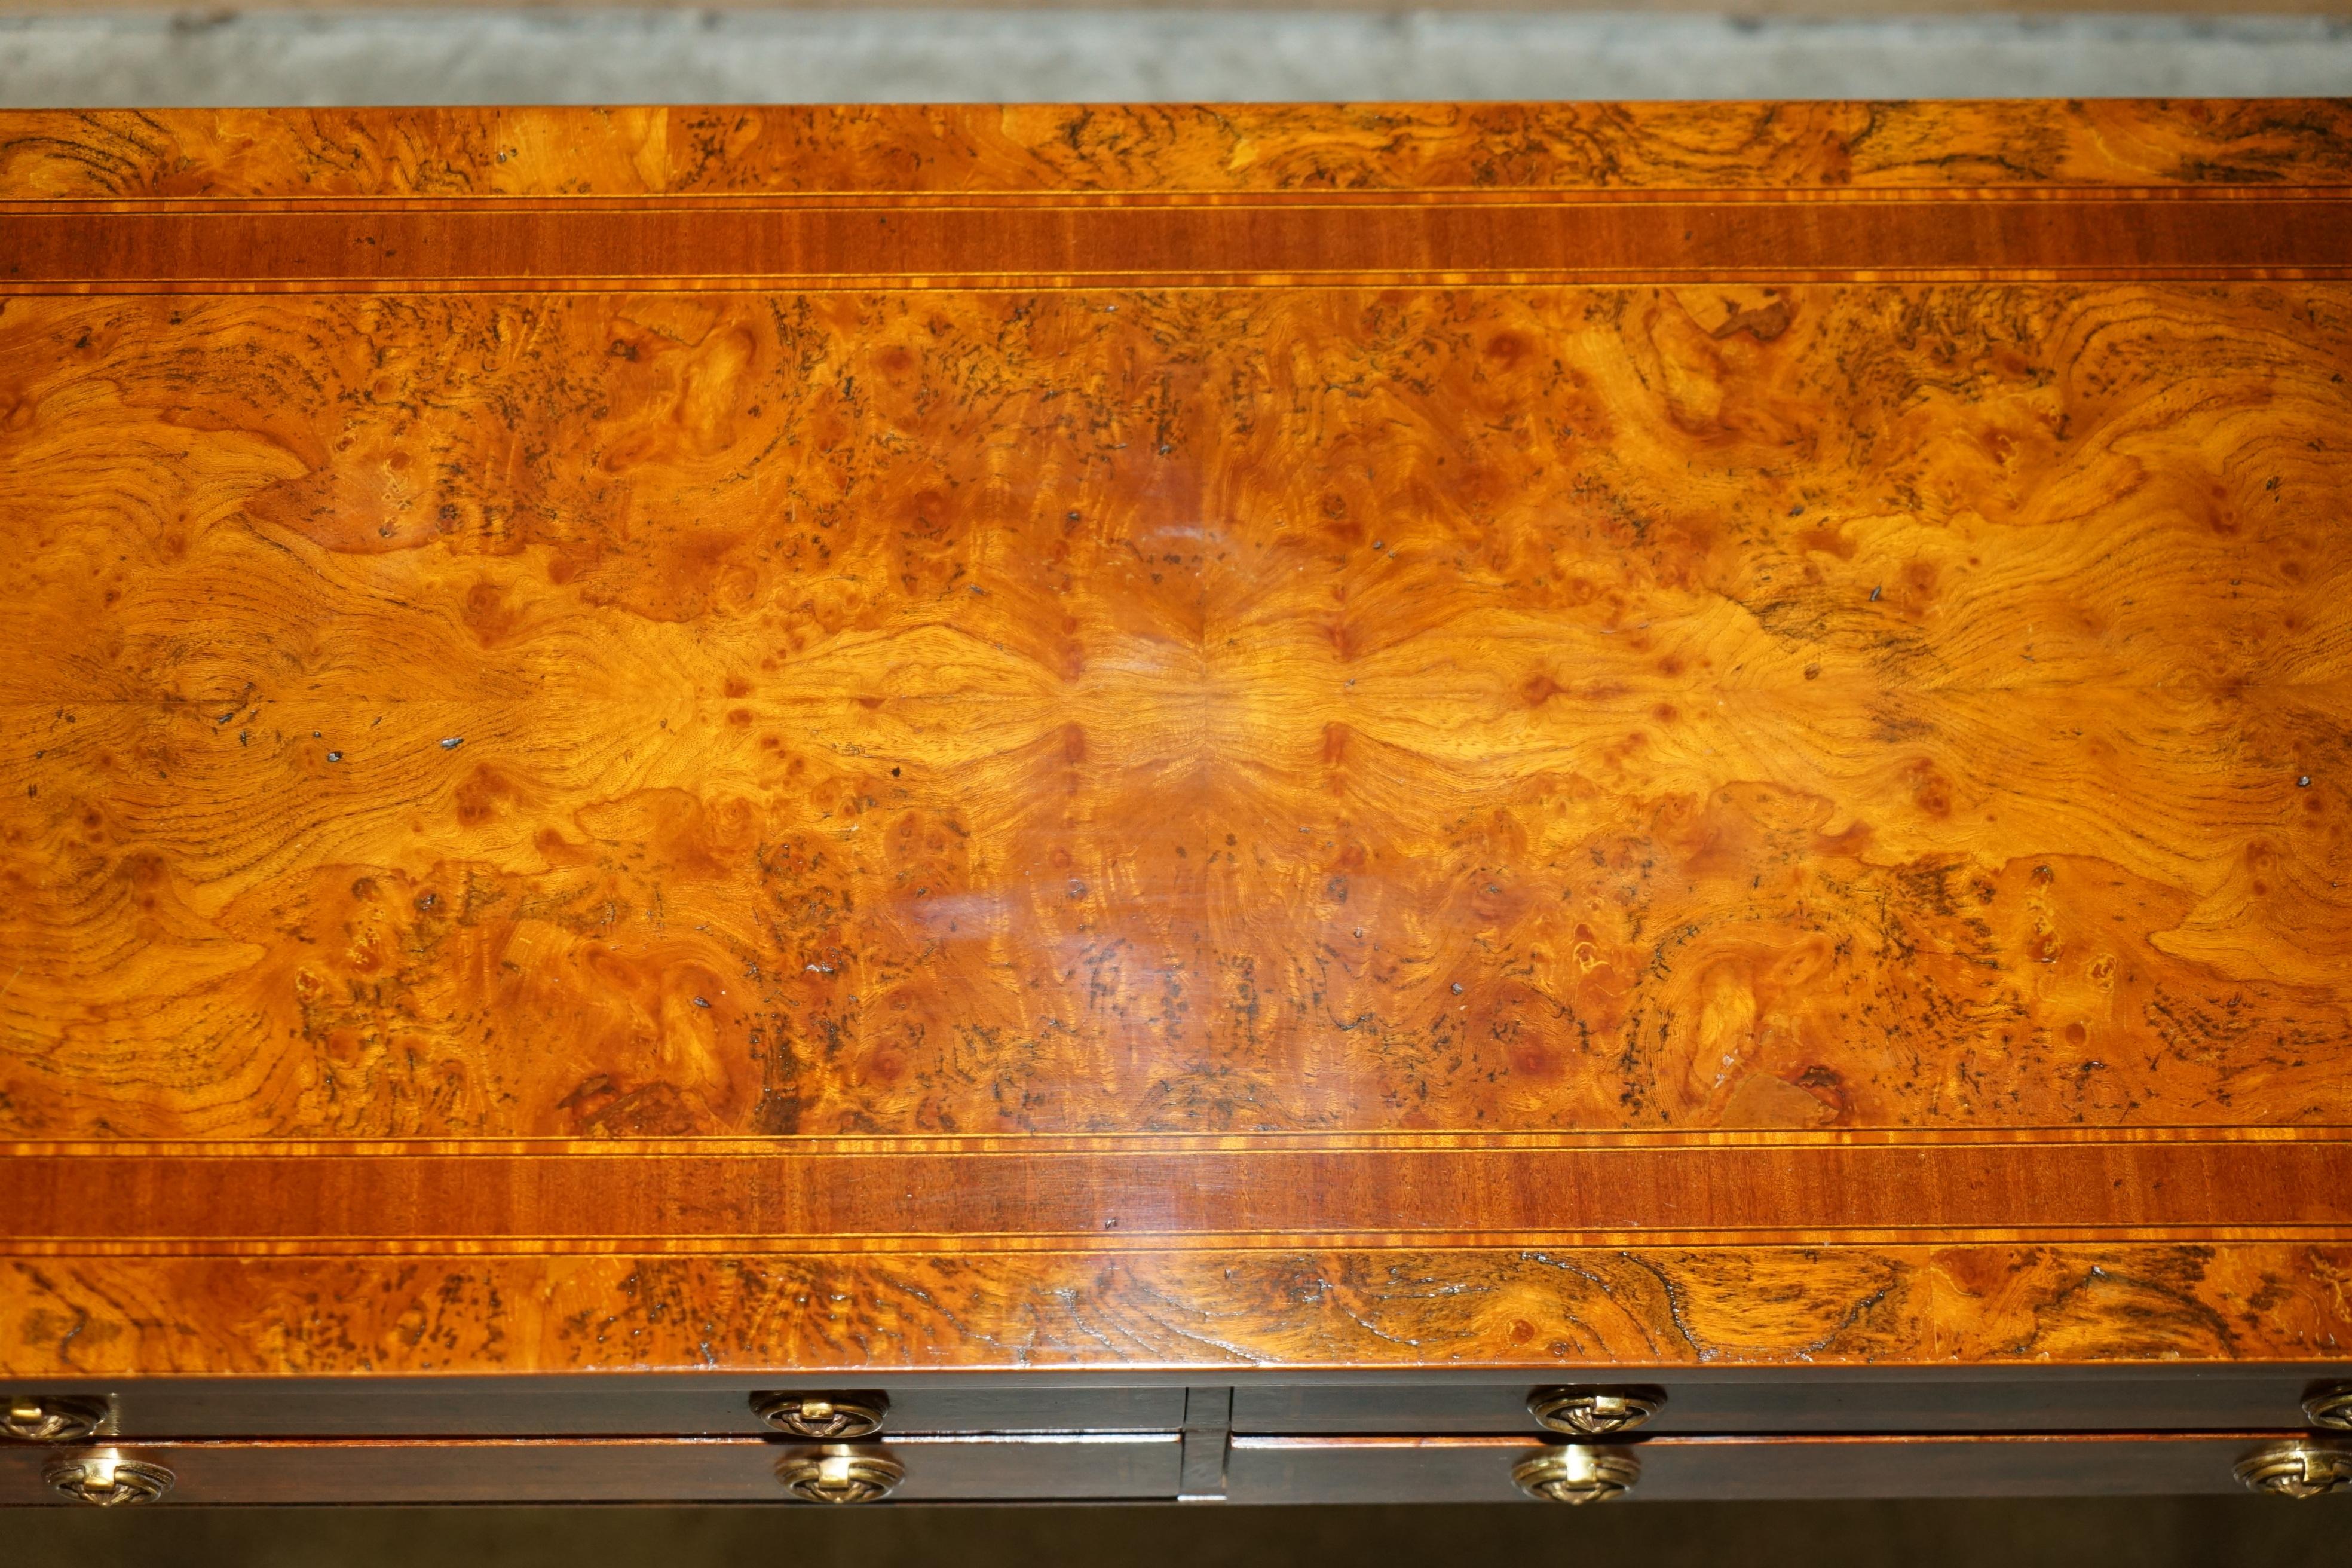 EXQUISITE CIRCA 1920 BURR ELM & SATiNWOOD FRENCH POLISHED RESTORED CONSOLE TABLE im Angebot 4